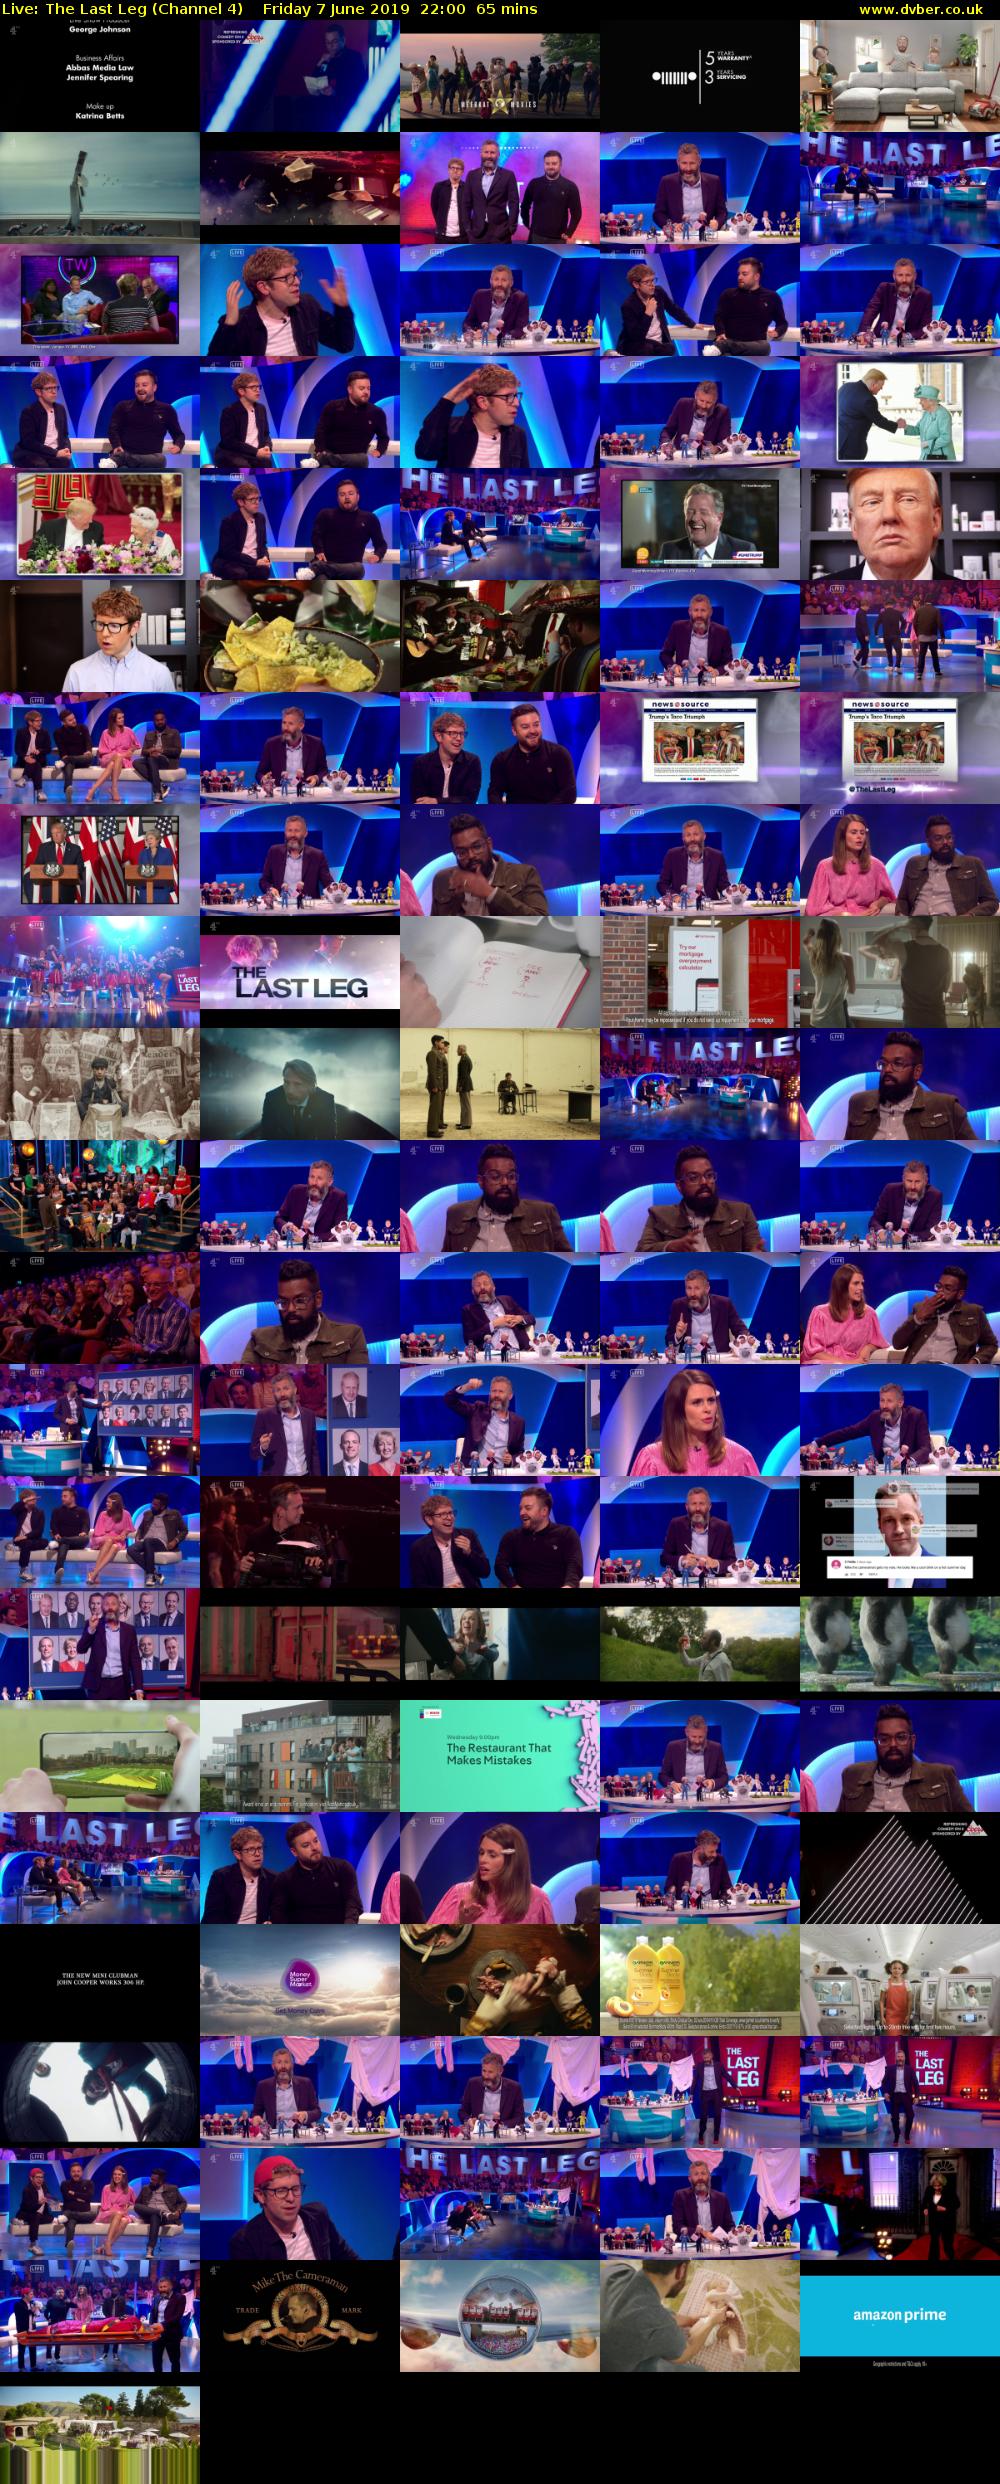 Live: The Last Leg (Channel 4) Friday 7 June 2019 22:00 - 23:05